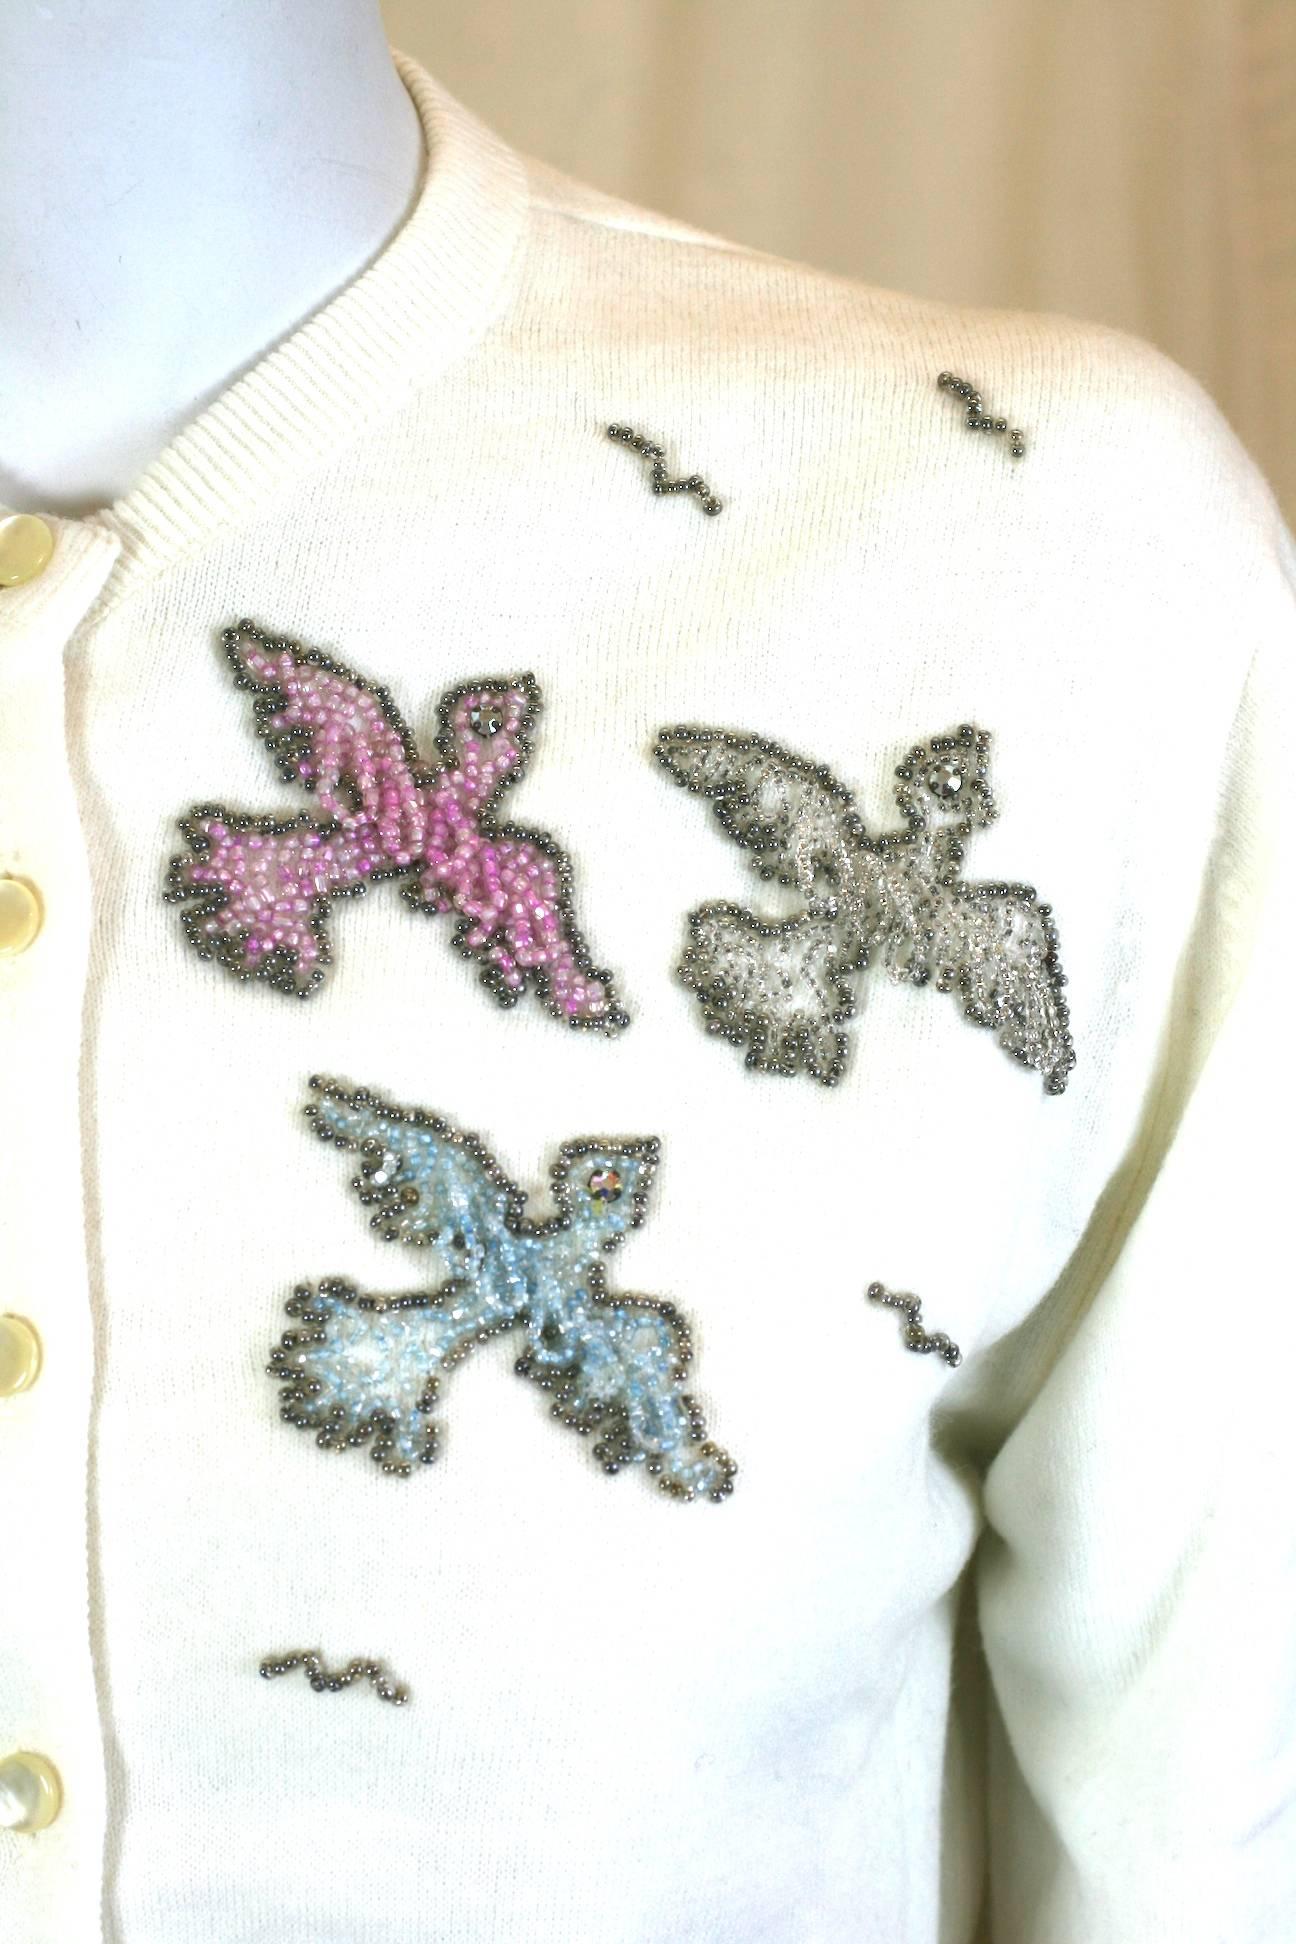 Charming cardigan from the 1950's with beaded 3D birds in flight. Birds are hand beaded with looped bead technique for movement and dimension. 
1950's USA. Small size. Orlon knit. 
Excellent condition. 